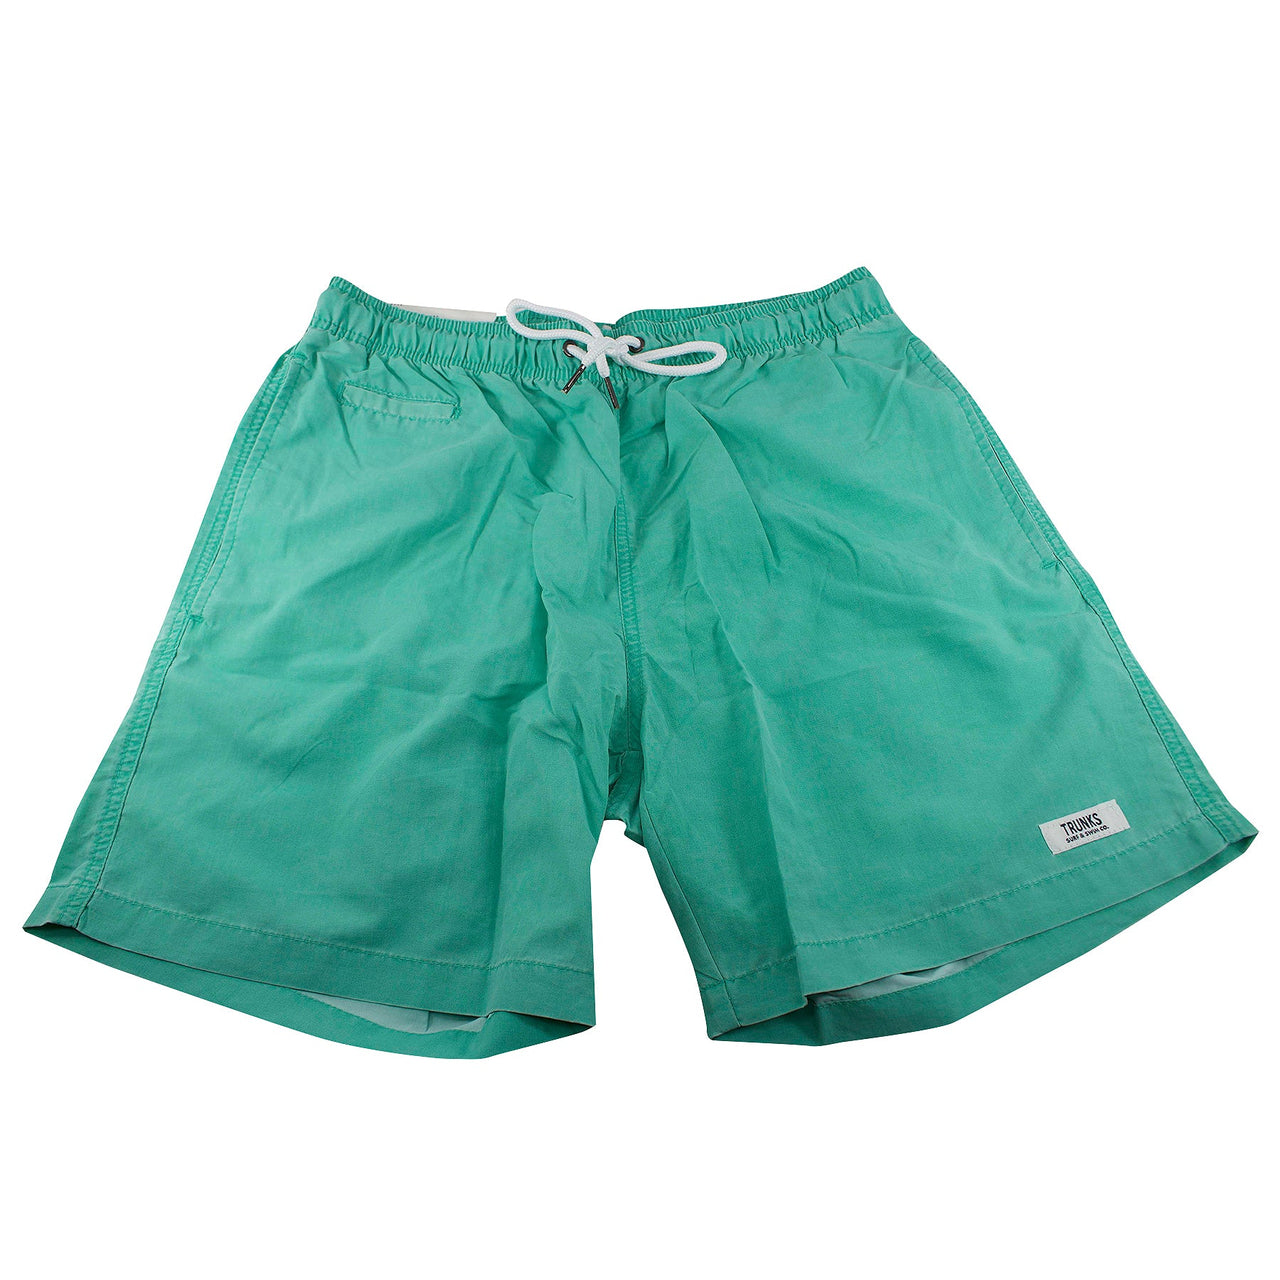 the seafoam green swim trunks are light green with side pockets